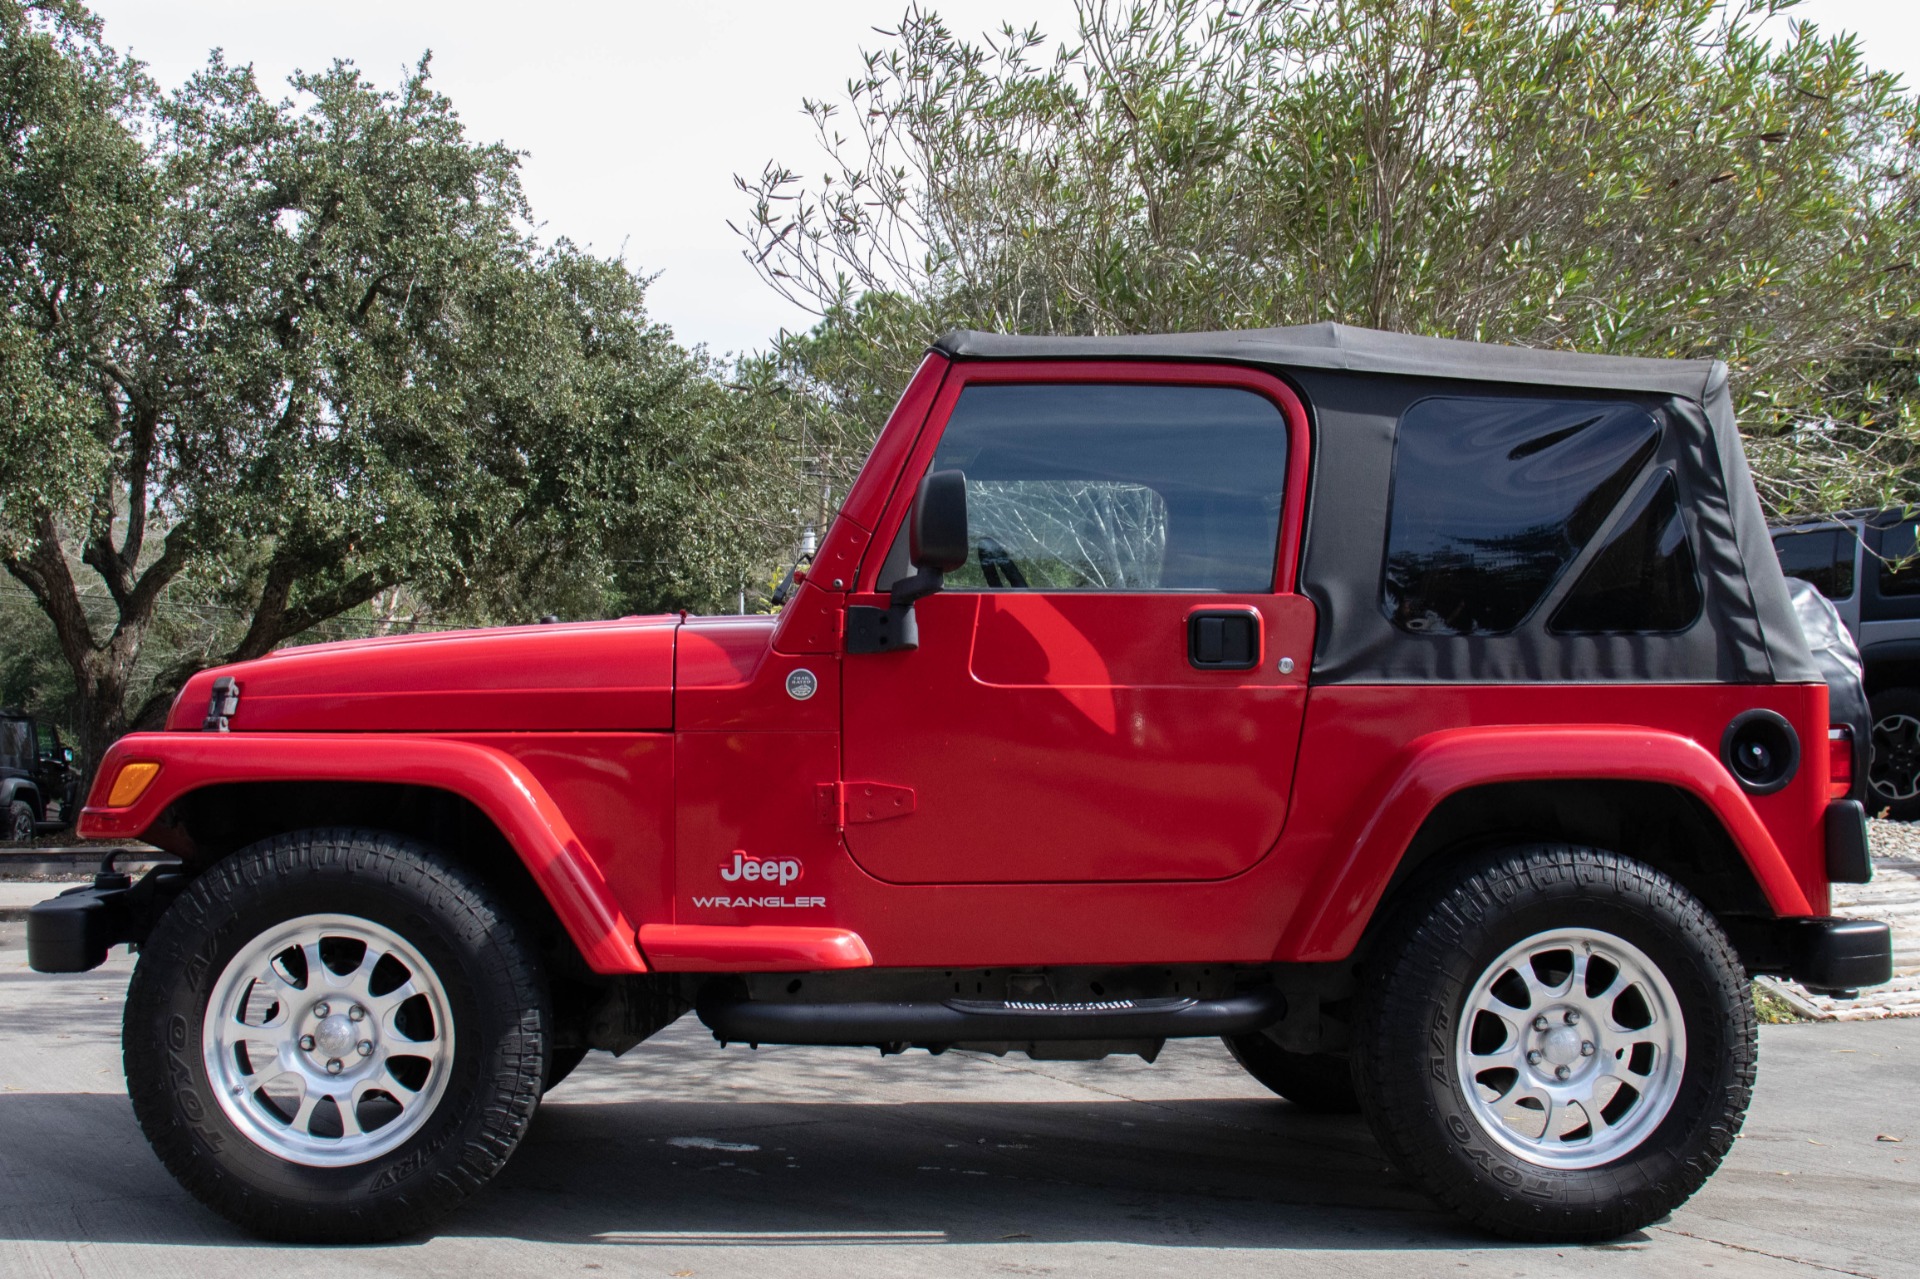 Used 2005 Jeep Wrangler Rocky Mountain For Sale ($15,995) | Select Jeeps  Inc. Stock #359386